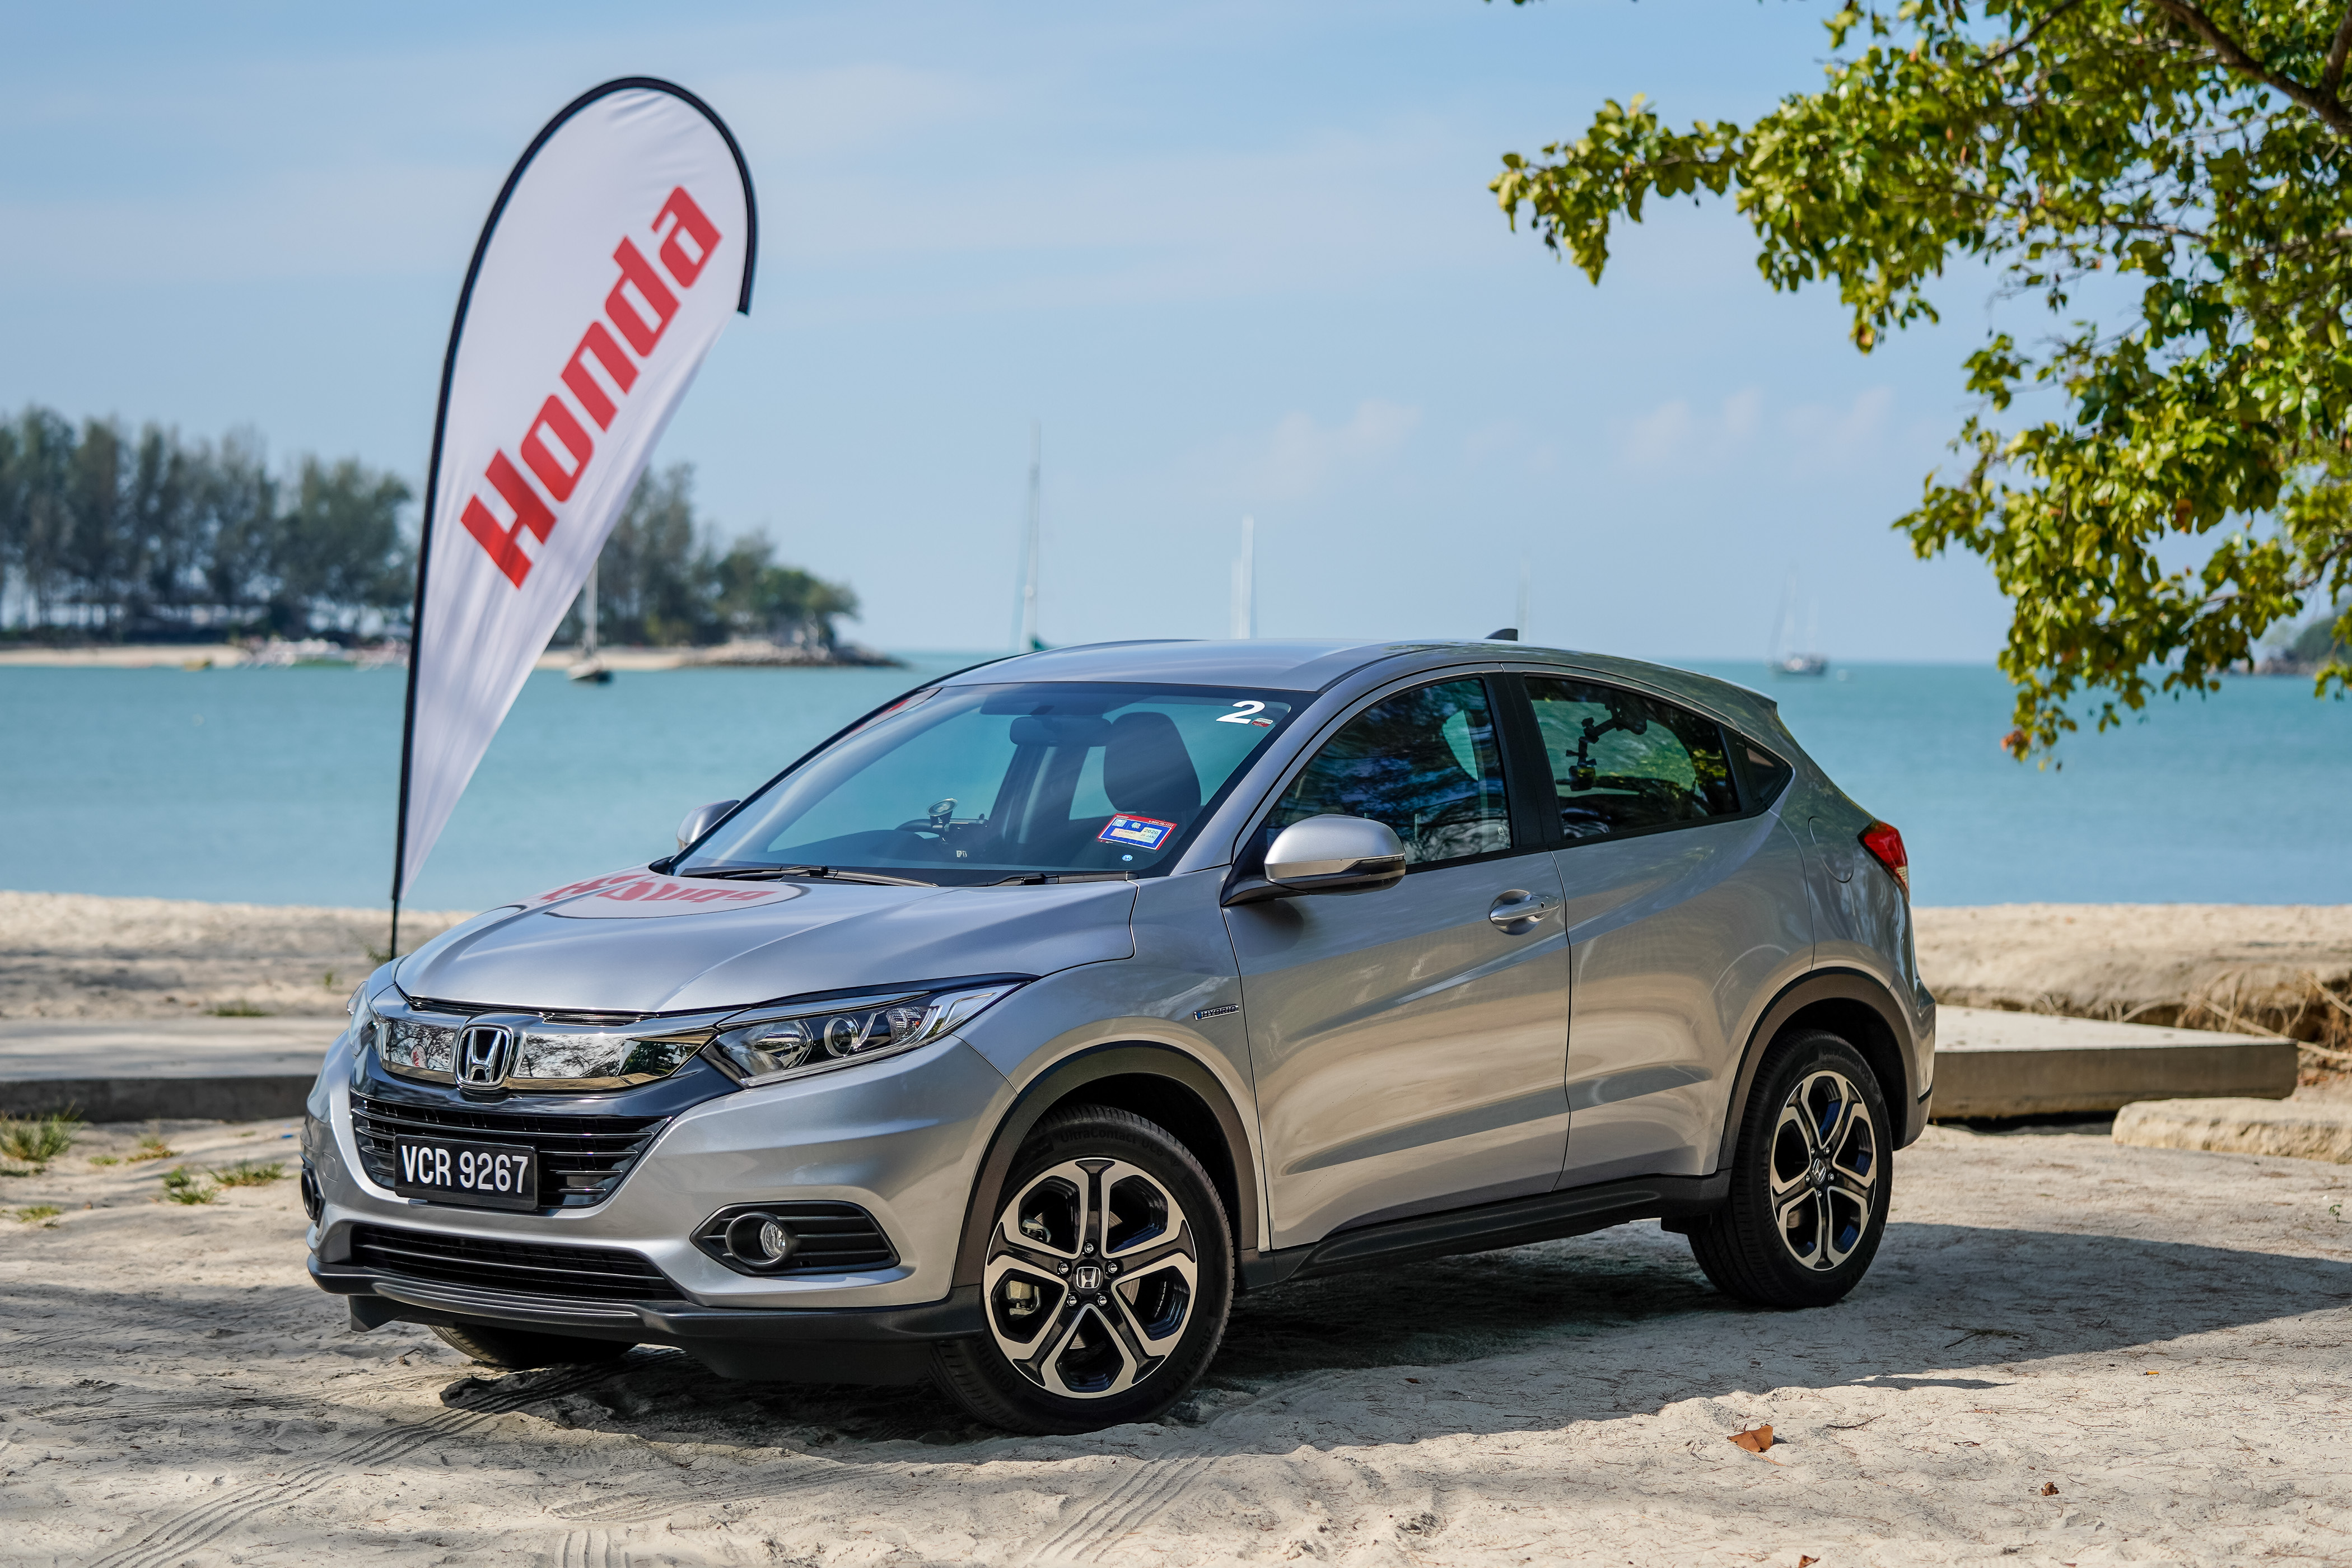 WEEKEND FEATURE: Honda HR-V Hybrid i-DCD Driven! - News and reviews on